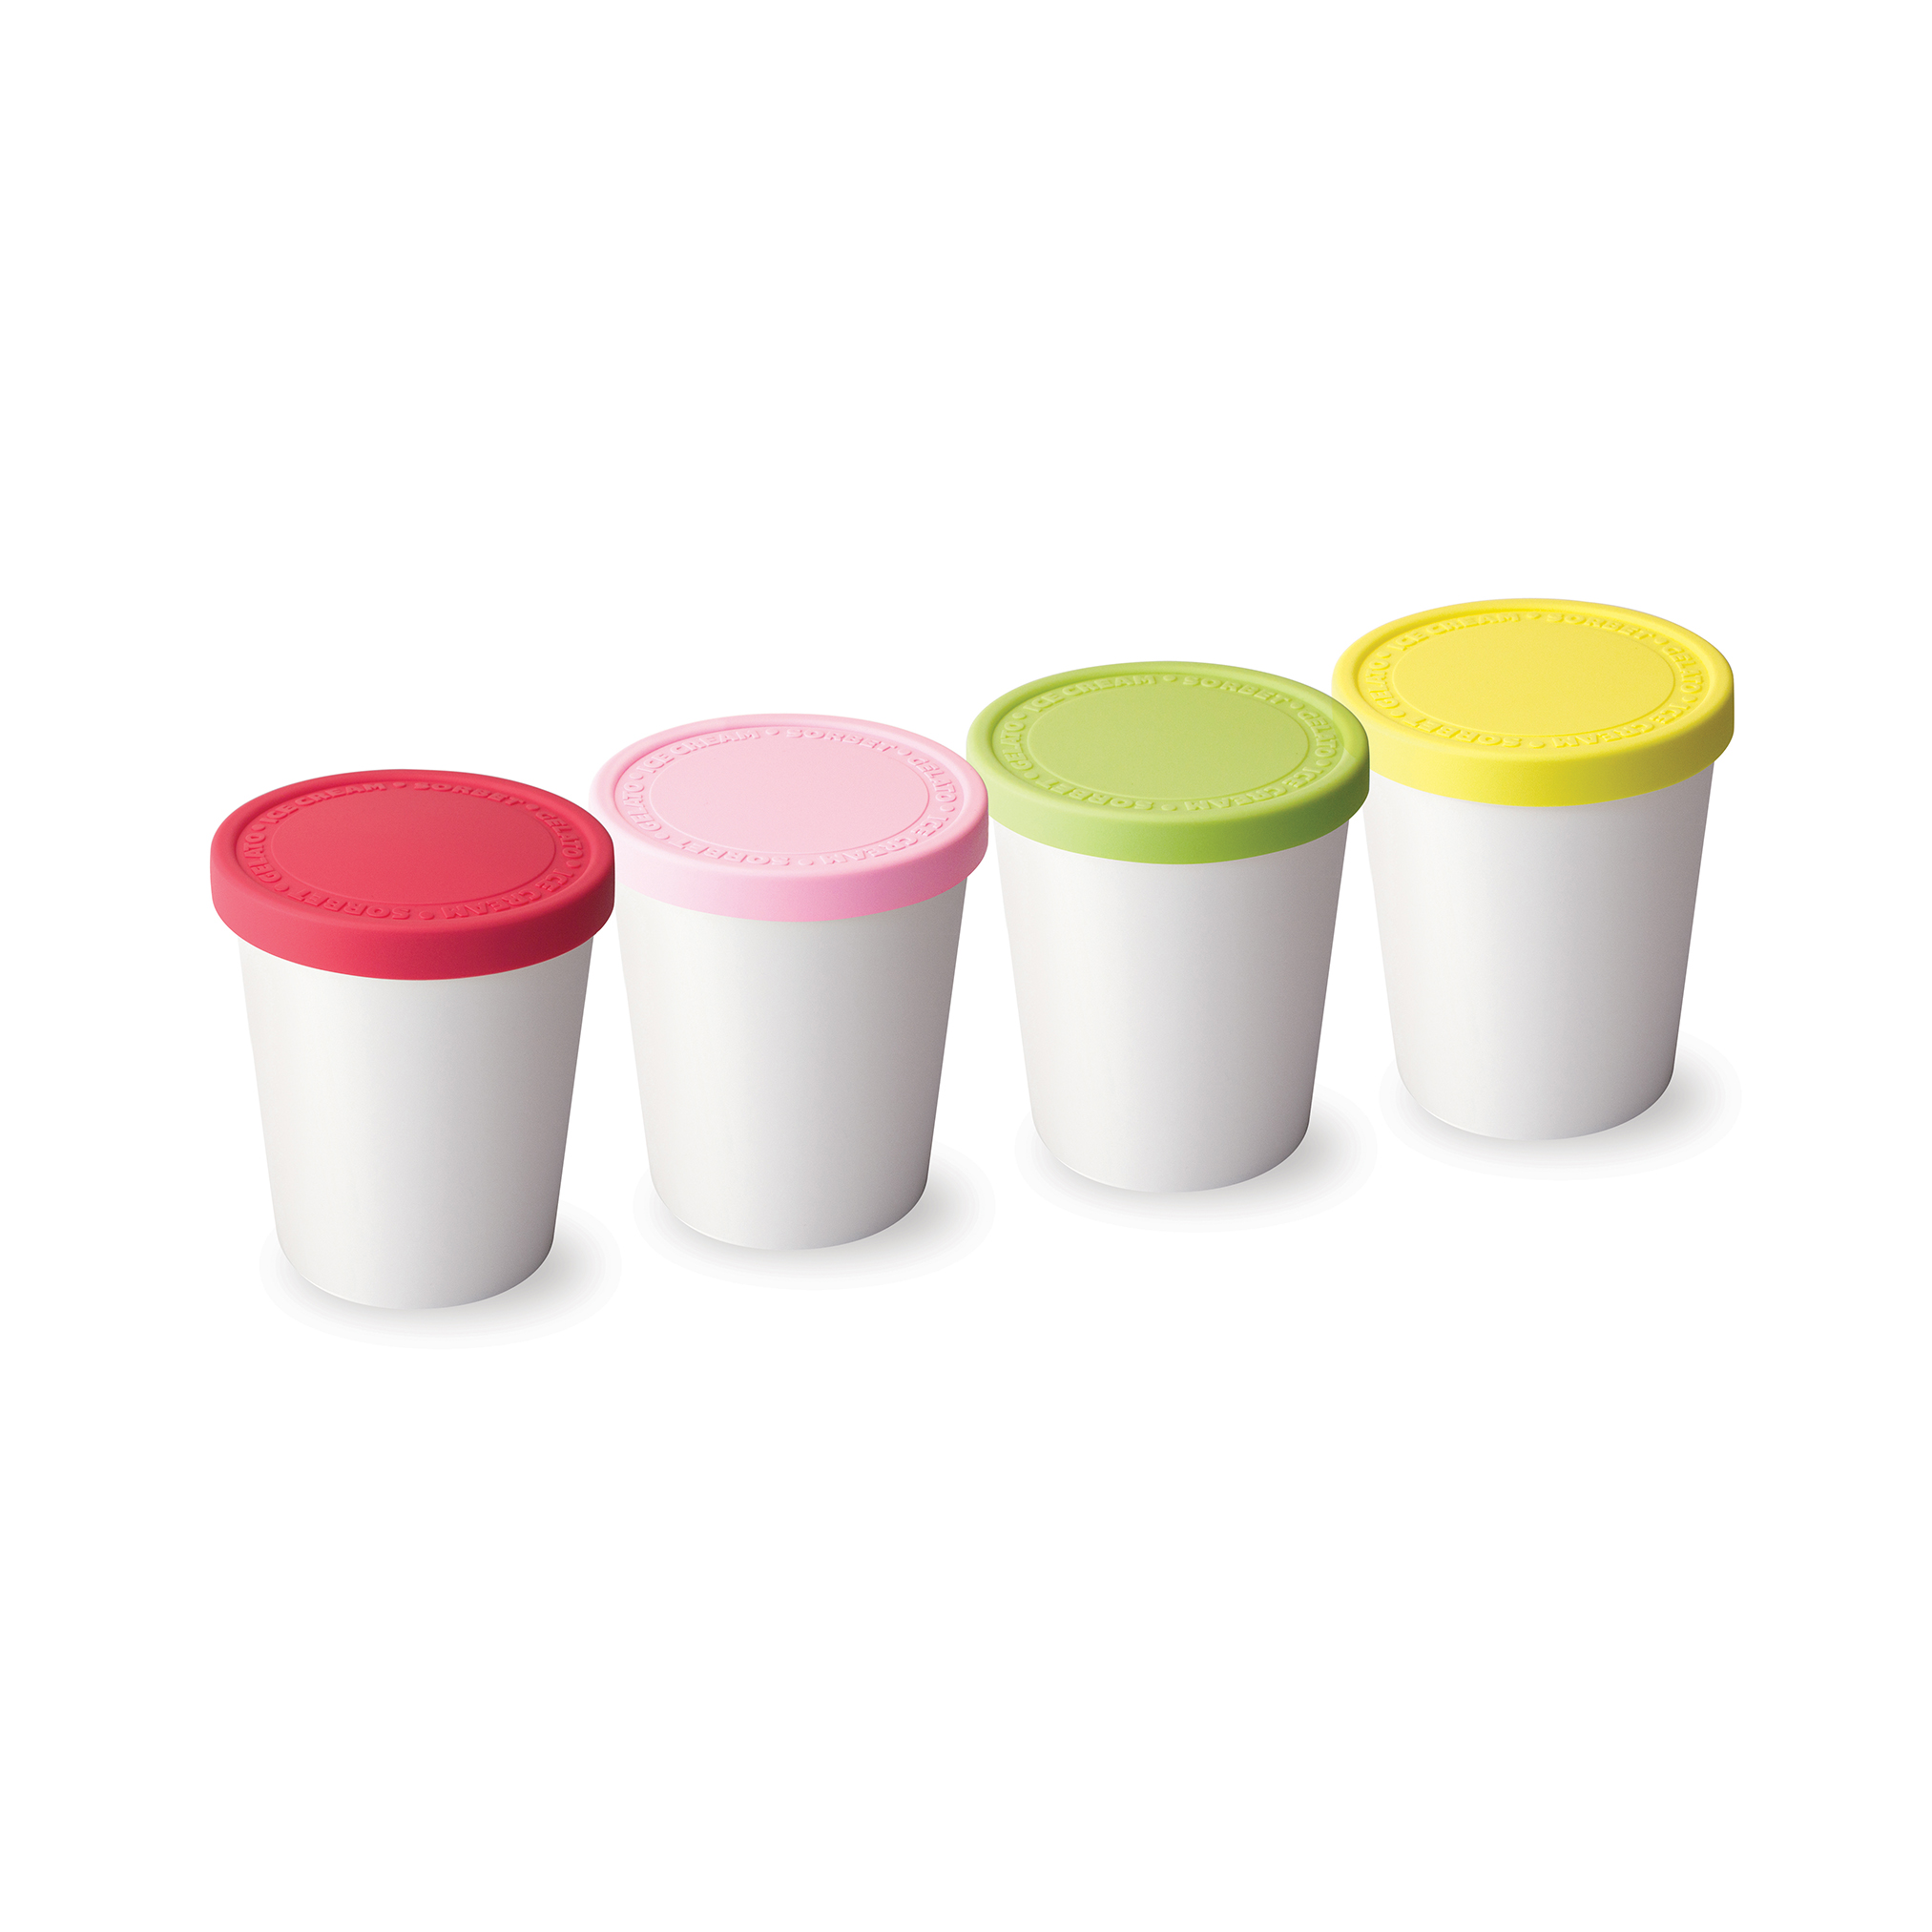 Tovolo Mini Sweet Treats Ice Cream Tubs, Reusable Container Stackable on Freezer Shelves, BPA-Free, Set of 4, Assorted Colors - image 1 of 5